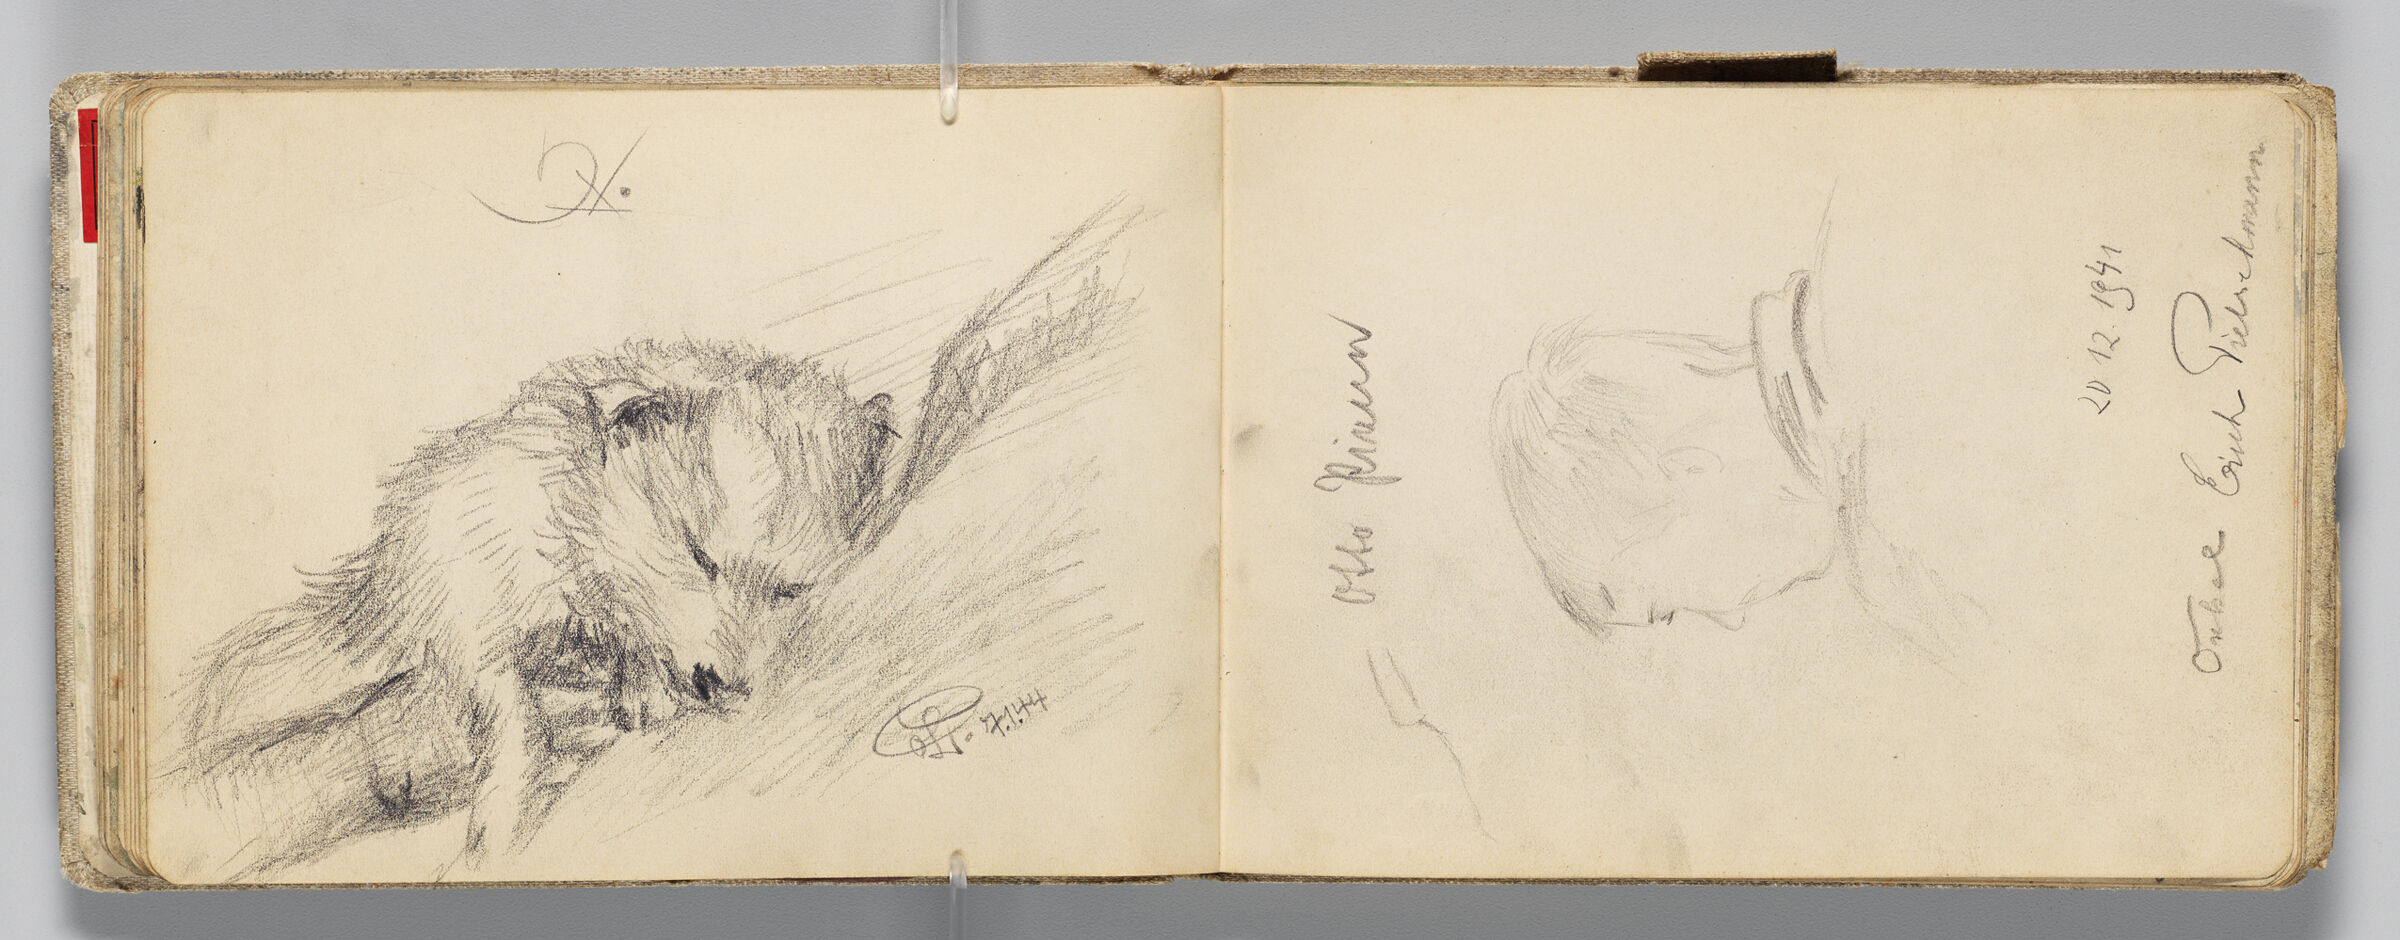 Untitled (Animal Sleeping, Left Page); Untitled (Portrait Of Artist's Uncle, Right Page)